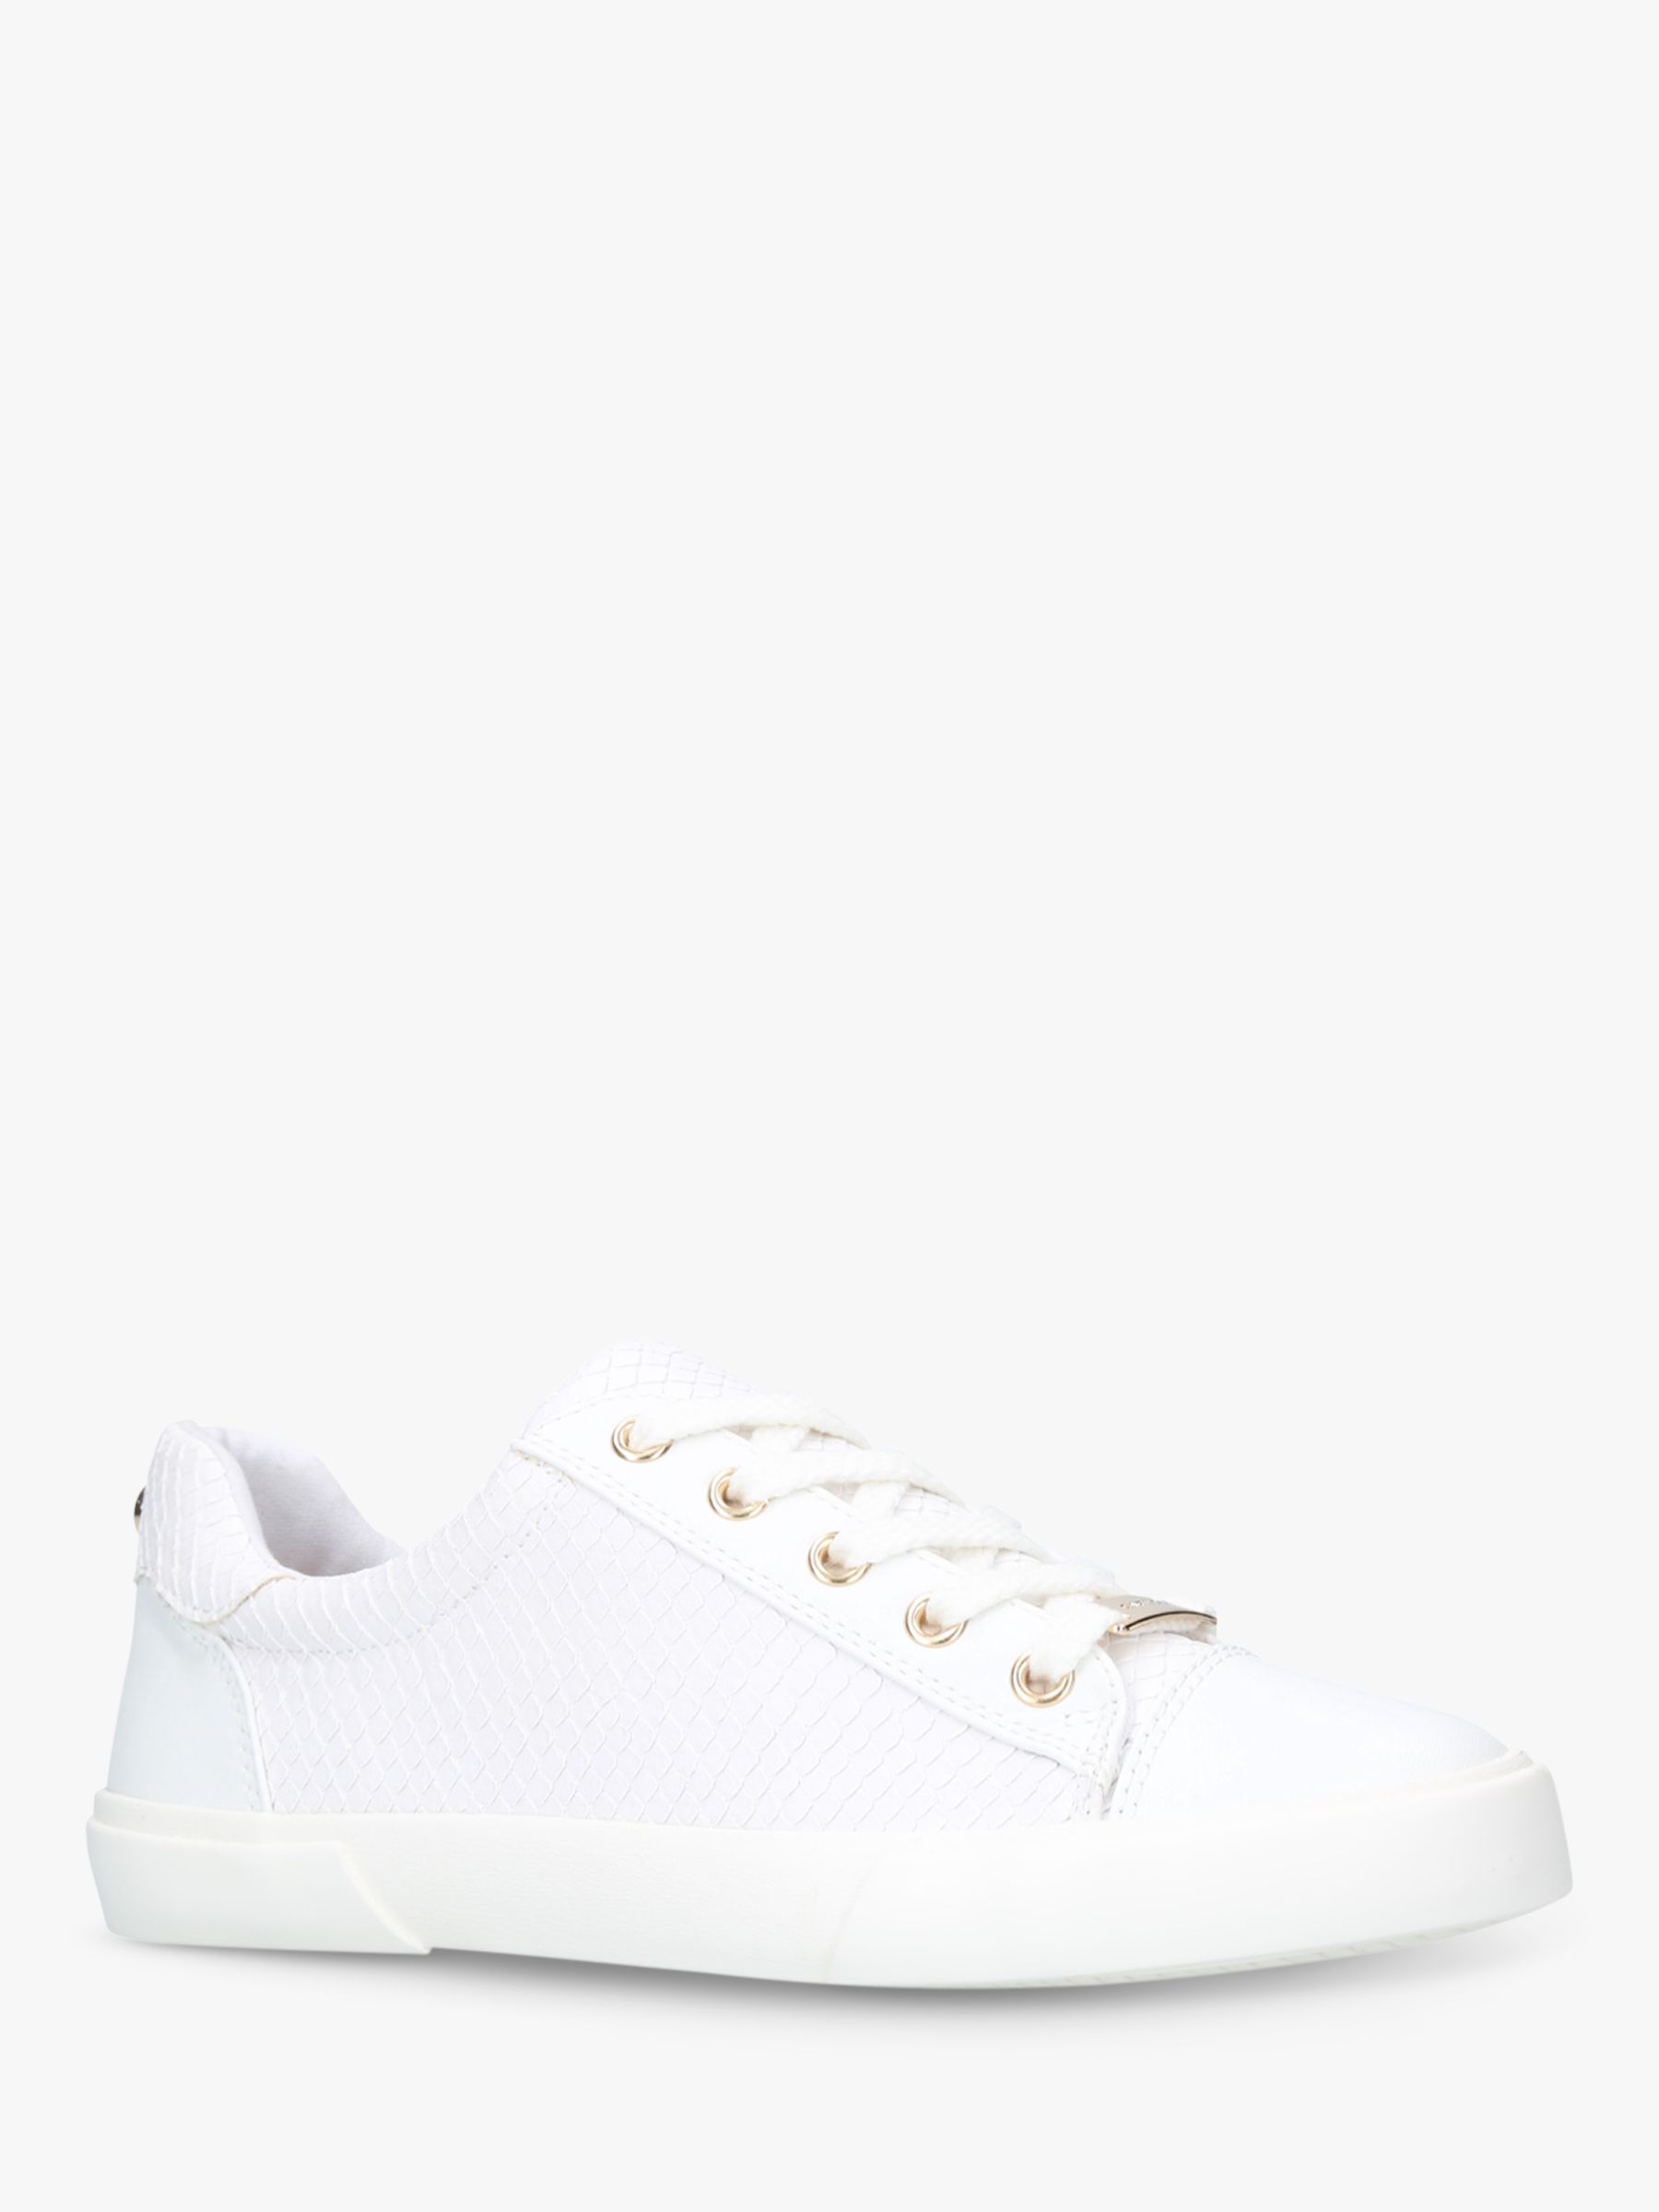 Carvela Light Lace Up Trainers, White at John Lewis & Partners